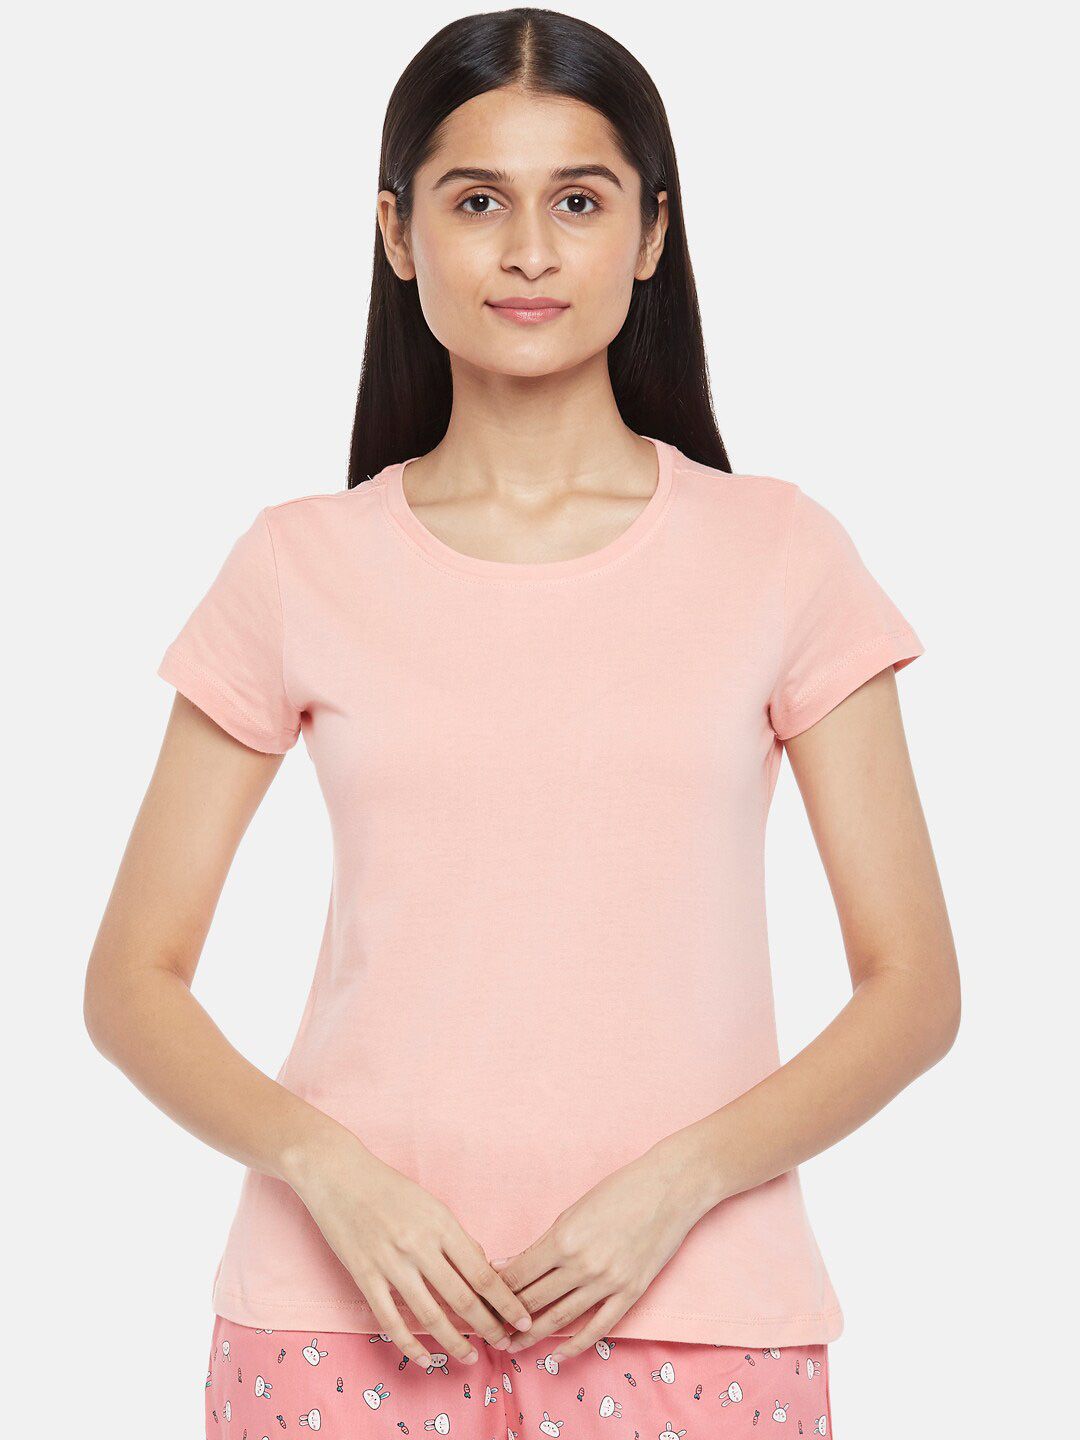 Dreamz by Pantaloons Pink Solid Pure Cotton Lounge T Shirt Price in India